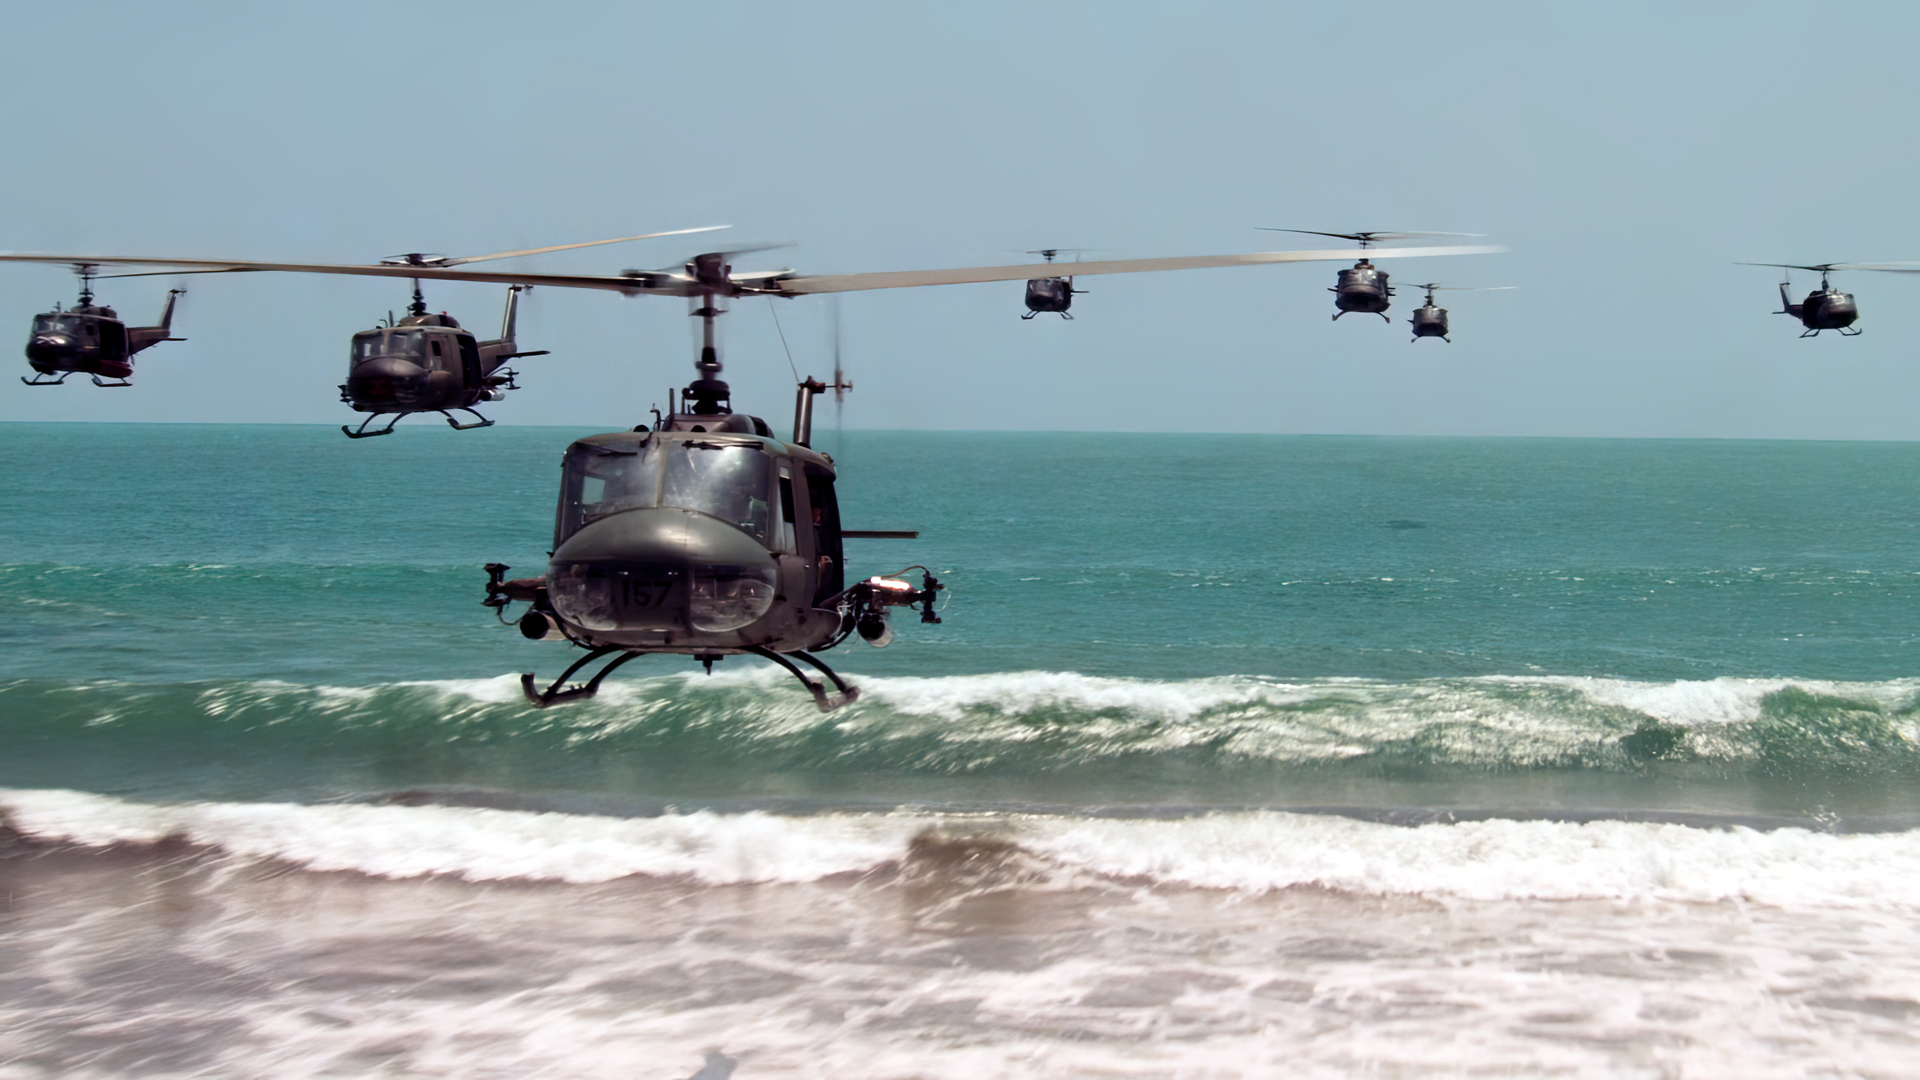 General 1920x1080 Apocalypse Now helicopters water movies film stills Vietnam War aircraft waves Bell UH-1 Iroquois sea Francis Ford Coppola